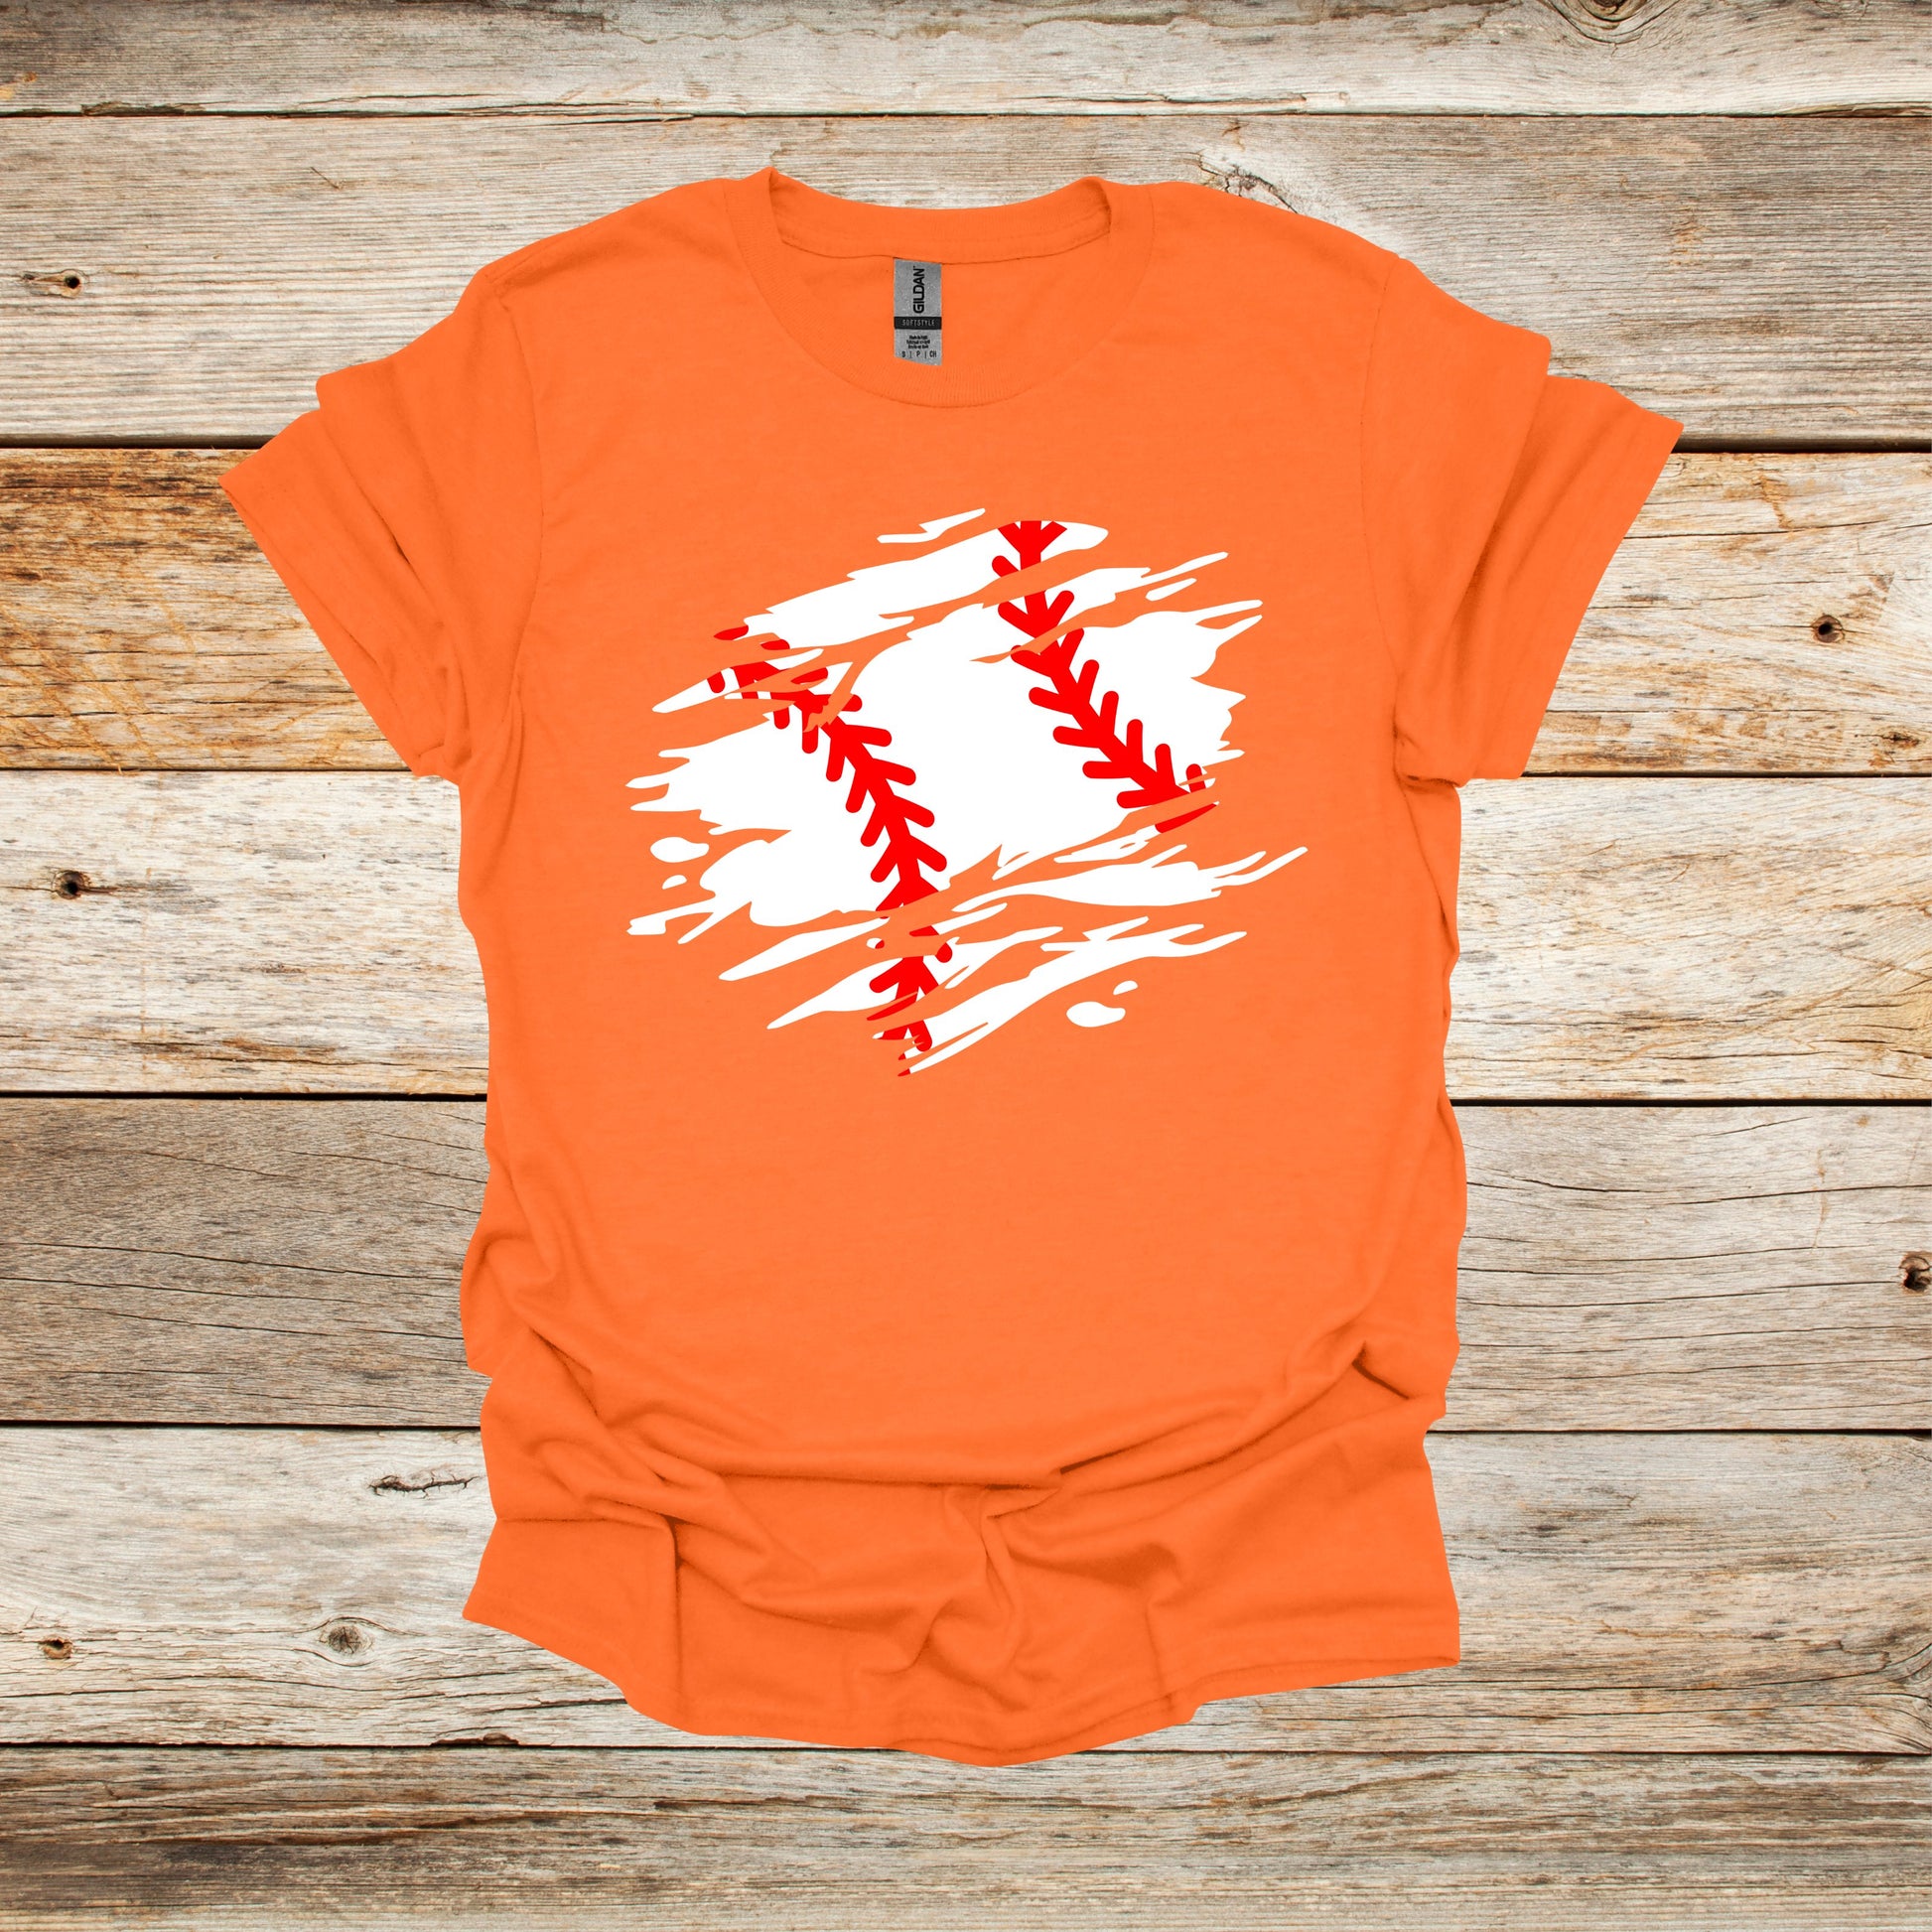 Baseball T-Shirt - Adult and Children's Tee Shirts - Sports T-Shirts Graphic Avenue Orange Adult Small 